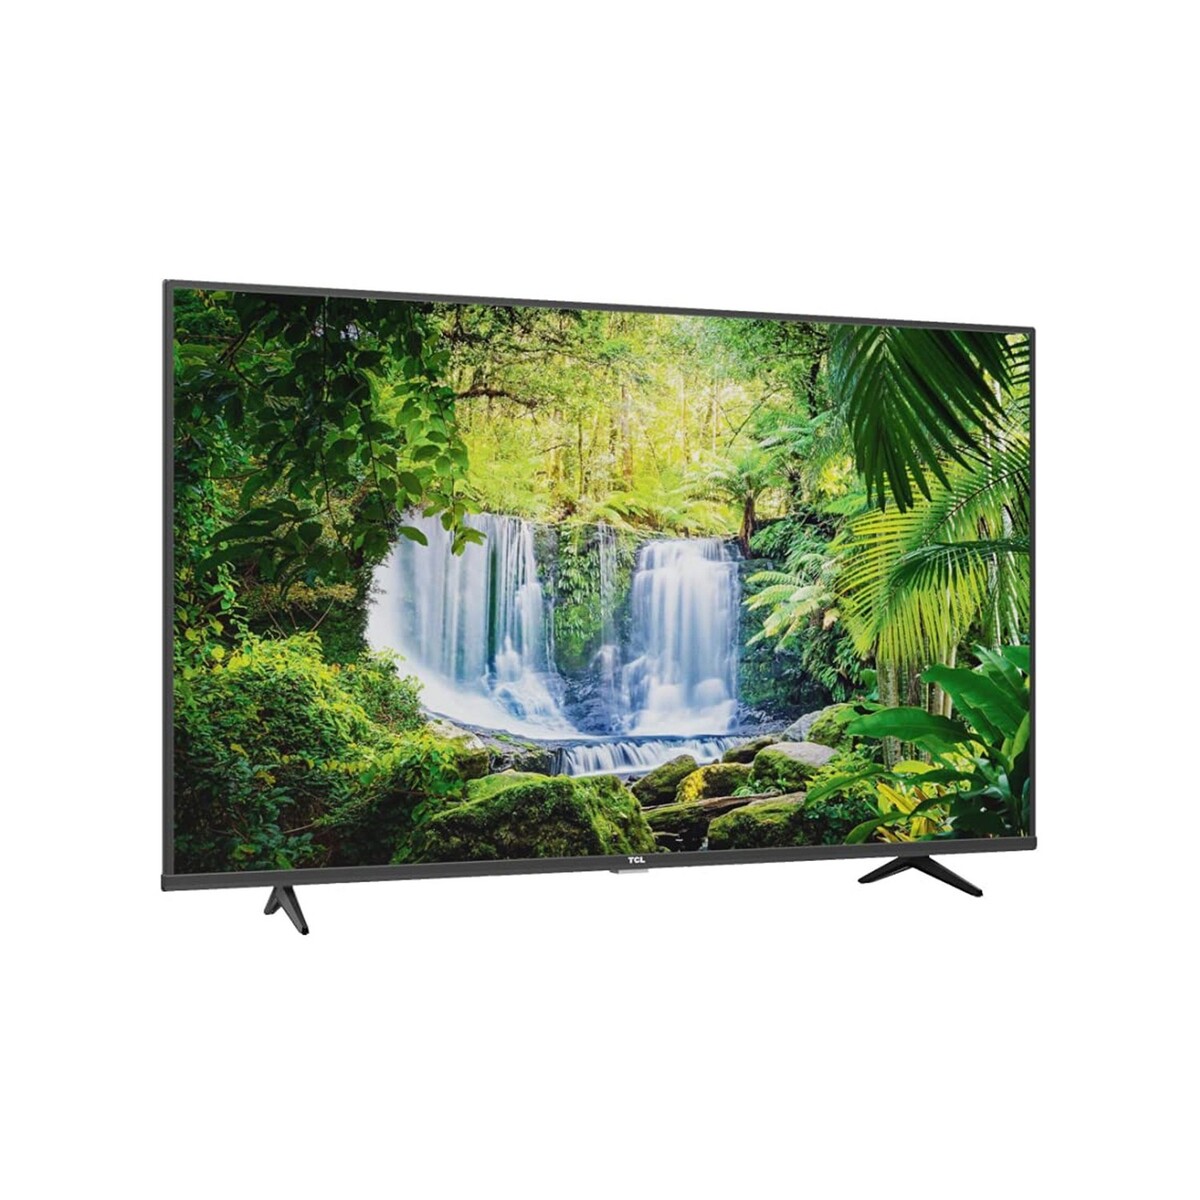 TCL 4K Ultra HD Android Smart LED TV 50P615 50"